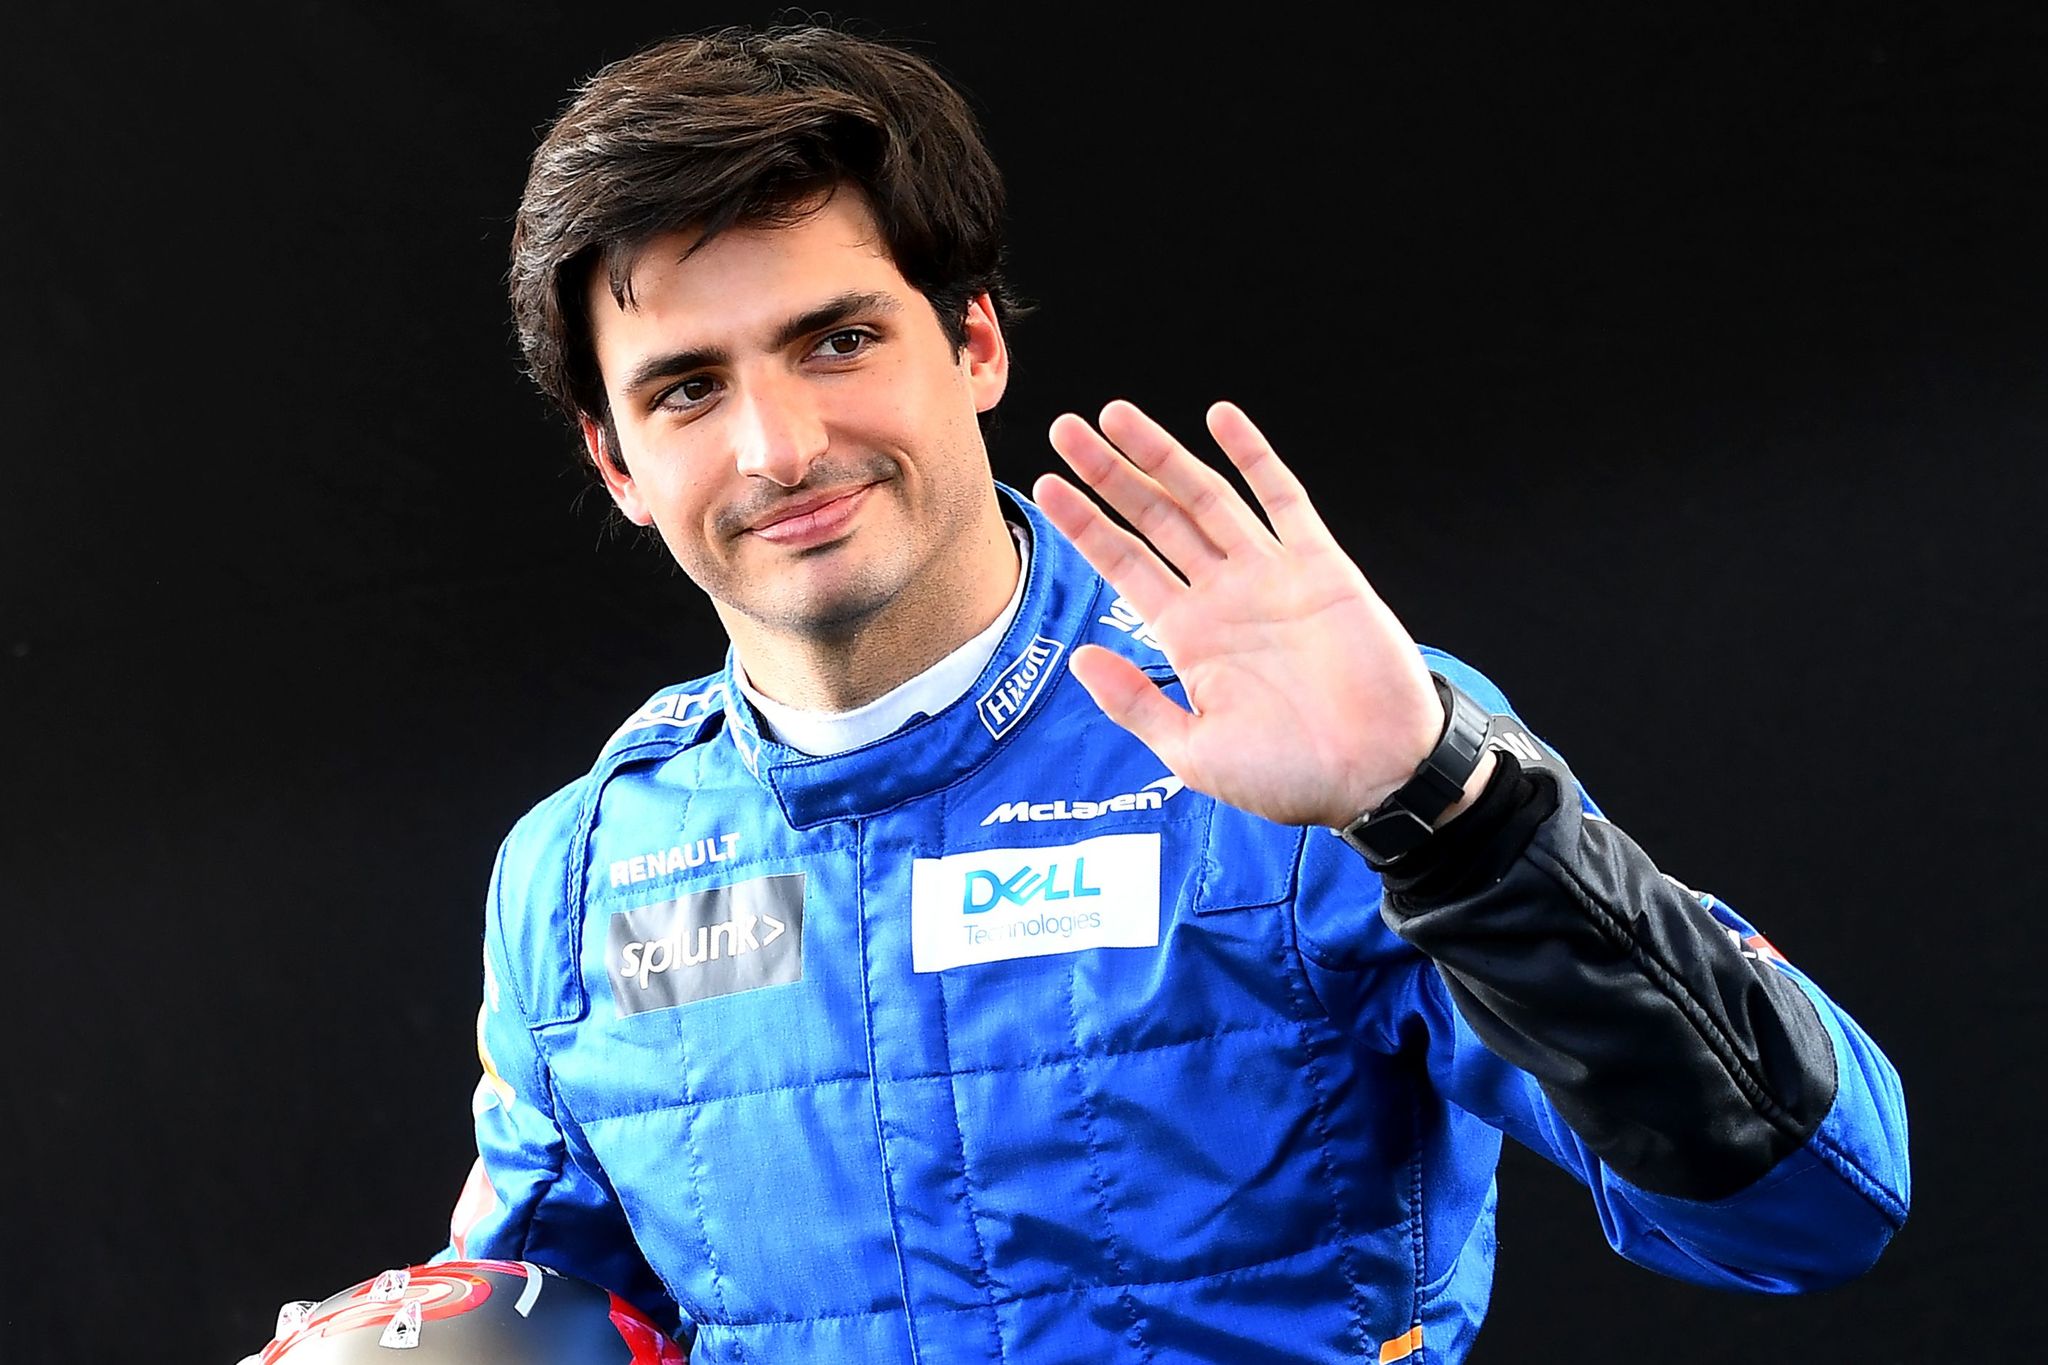 (FILES) In this file photo taken on March 12, 2020 then McLarens Spanish driver lt;HIT gt;Carlos lt;/HIT gt; lt;HIT gt;Sainz lt;/HIT gt; Jr poses for a photo at the Albert Park circuit ahead of the Formula One Australian Grand Prix in Melbourne. - lt;HIT gt;Sainz lt;/HIT gt; is to succeed Vettel at Ferrari F1 team next season, Ferrari officially announced on May 14, 2020. (Photo by William WEST / AFP) / -- IMAGE RESTRICTED TO EDITORIAL USE - STRICTLY NO COMMERCIAL USE --